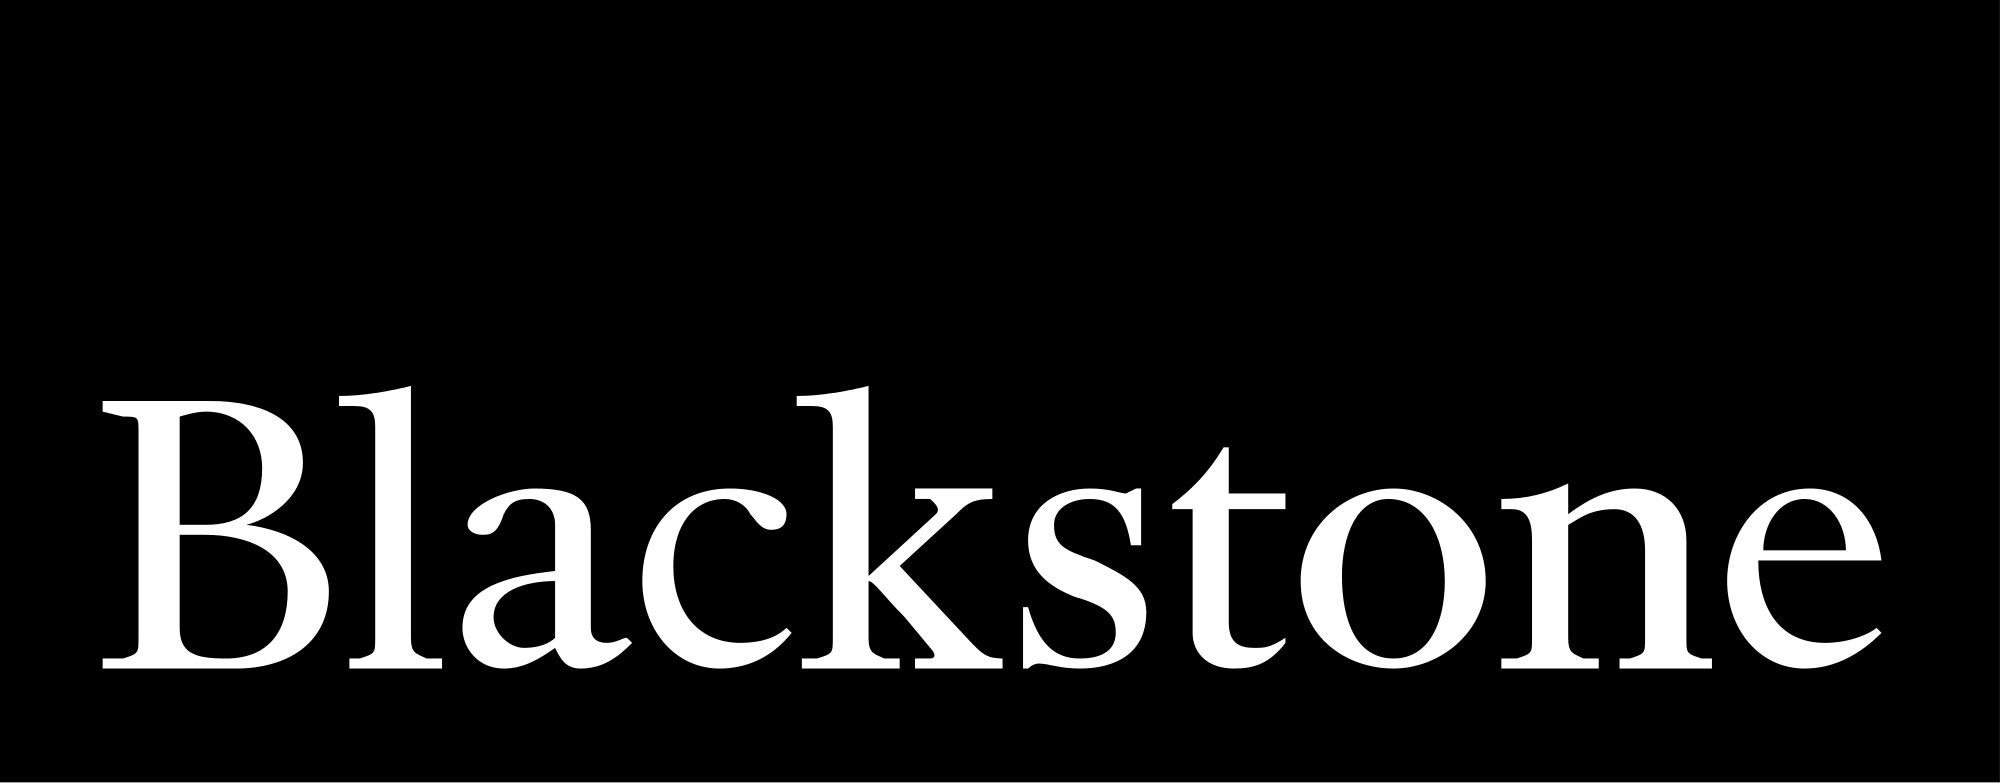 Blackstone Features Bread & Butter